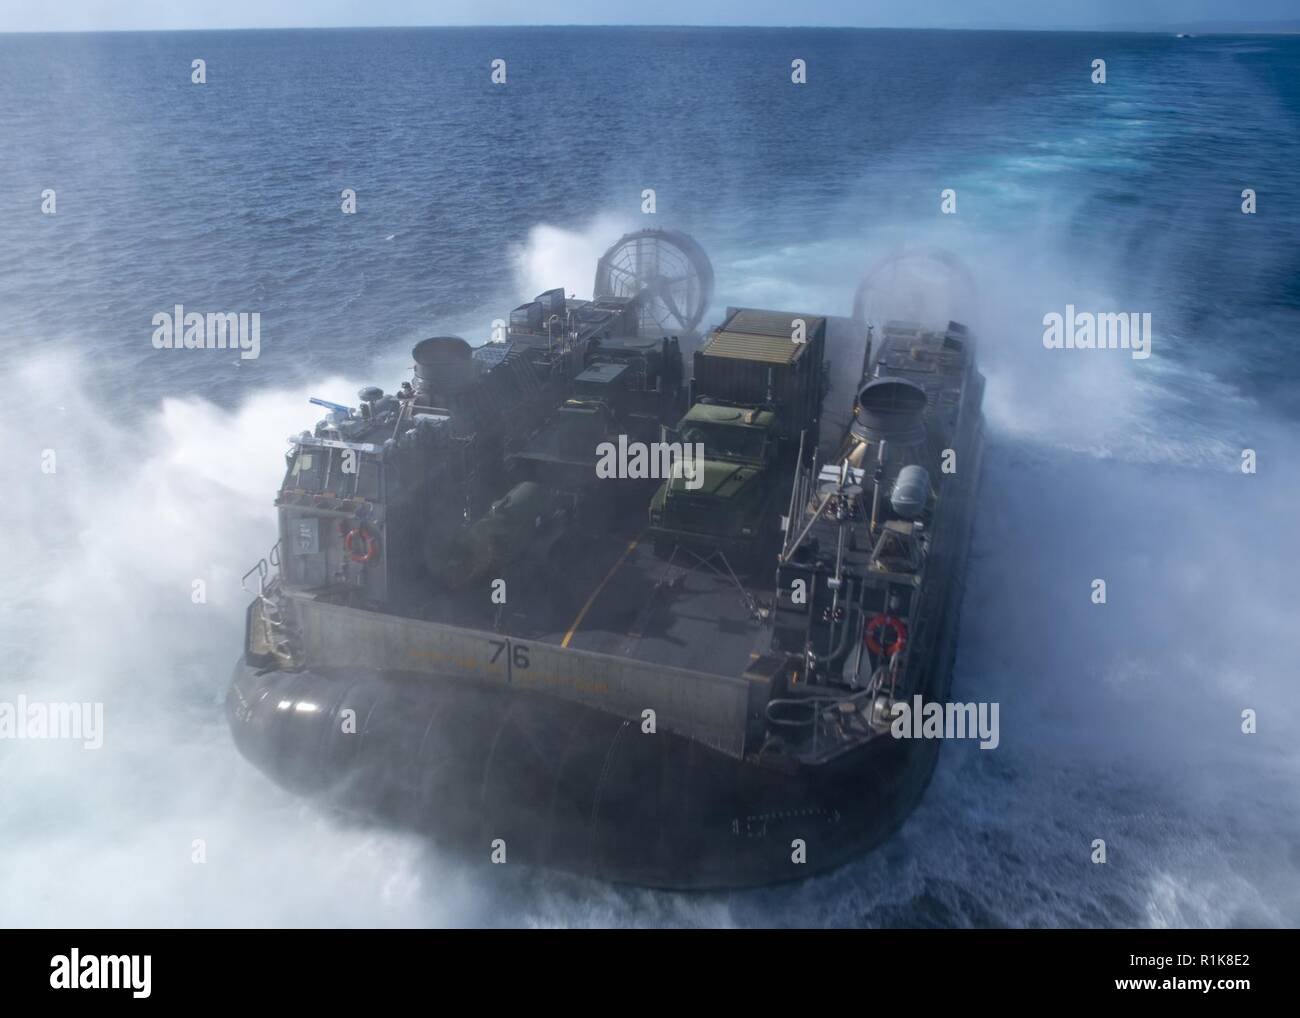 PACIFIC OCEAN (Oct. 10, 2018) Landing craft air cushion (LCAC) 76, assigned to Assault Craft Unit (ACU) 5, disembarks the well deck of the amphibious assault ship USS Bonhomme Richard (LHD 6). Bonhomme Richard is operating in the U.S. 3rd Fleet area of operations. Stock Photo